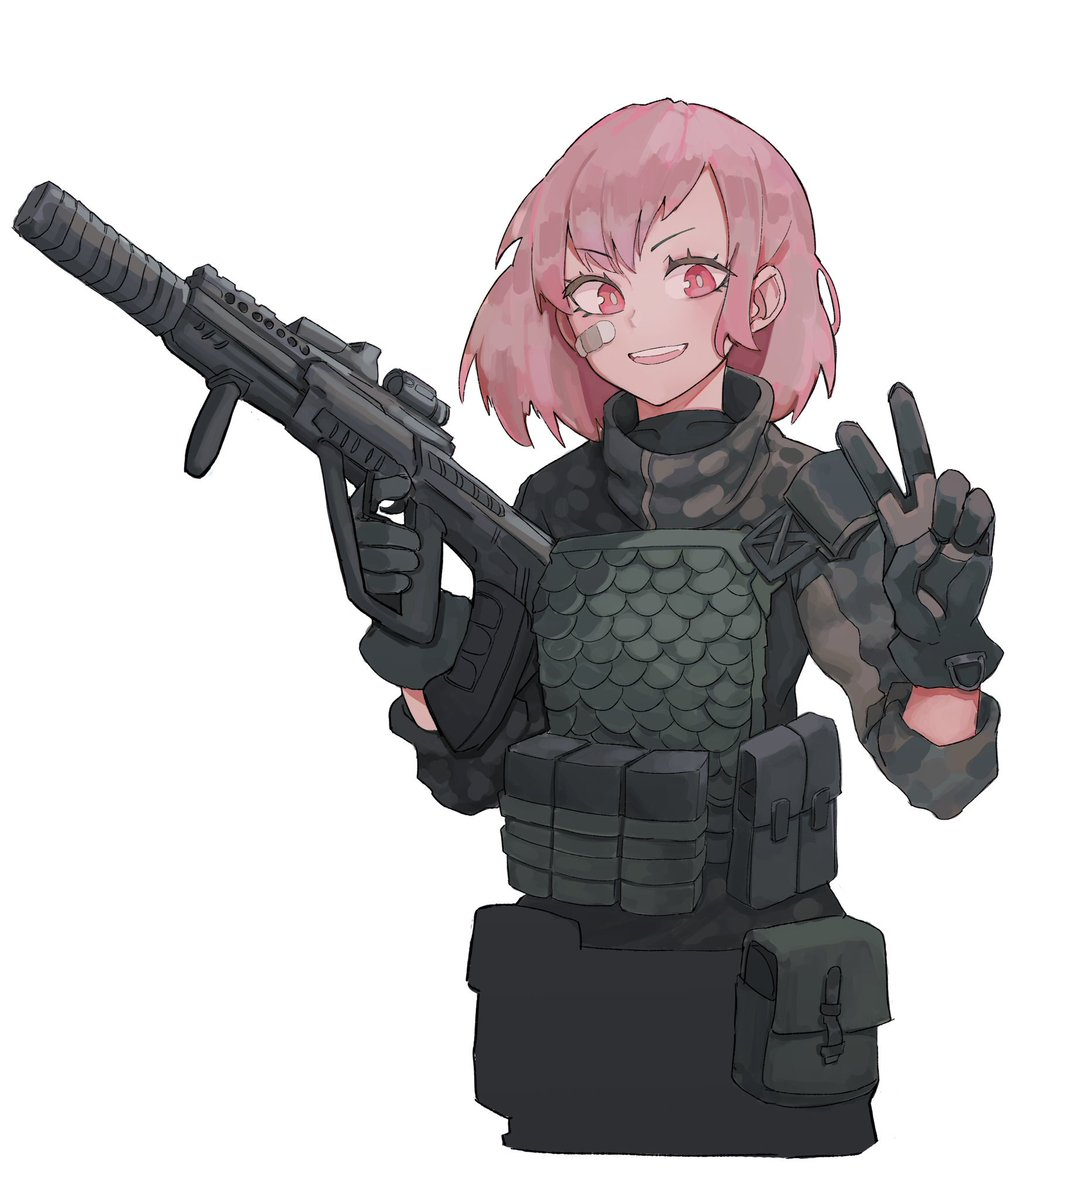 924006 4K, anime girls, anime, female soldier, soldier - Rare Gallery HD  Wallpapers